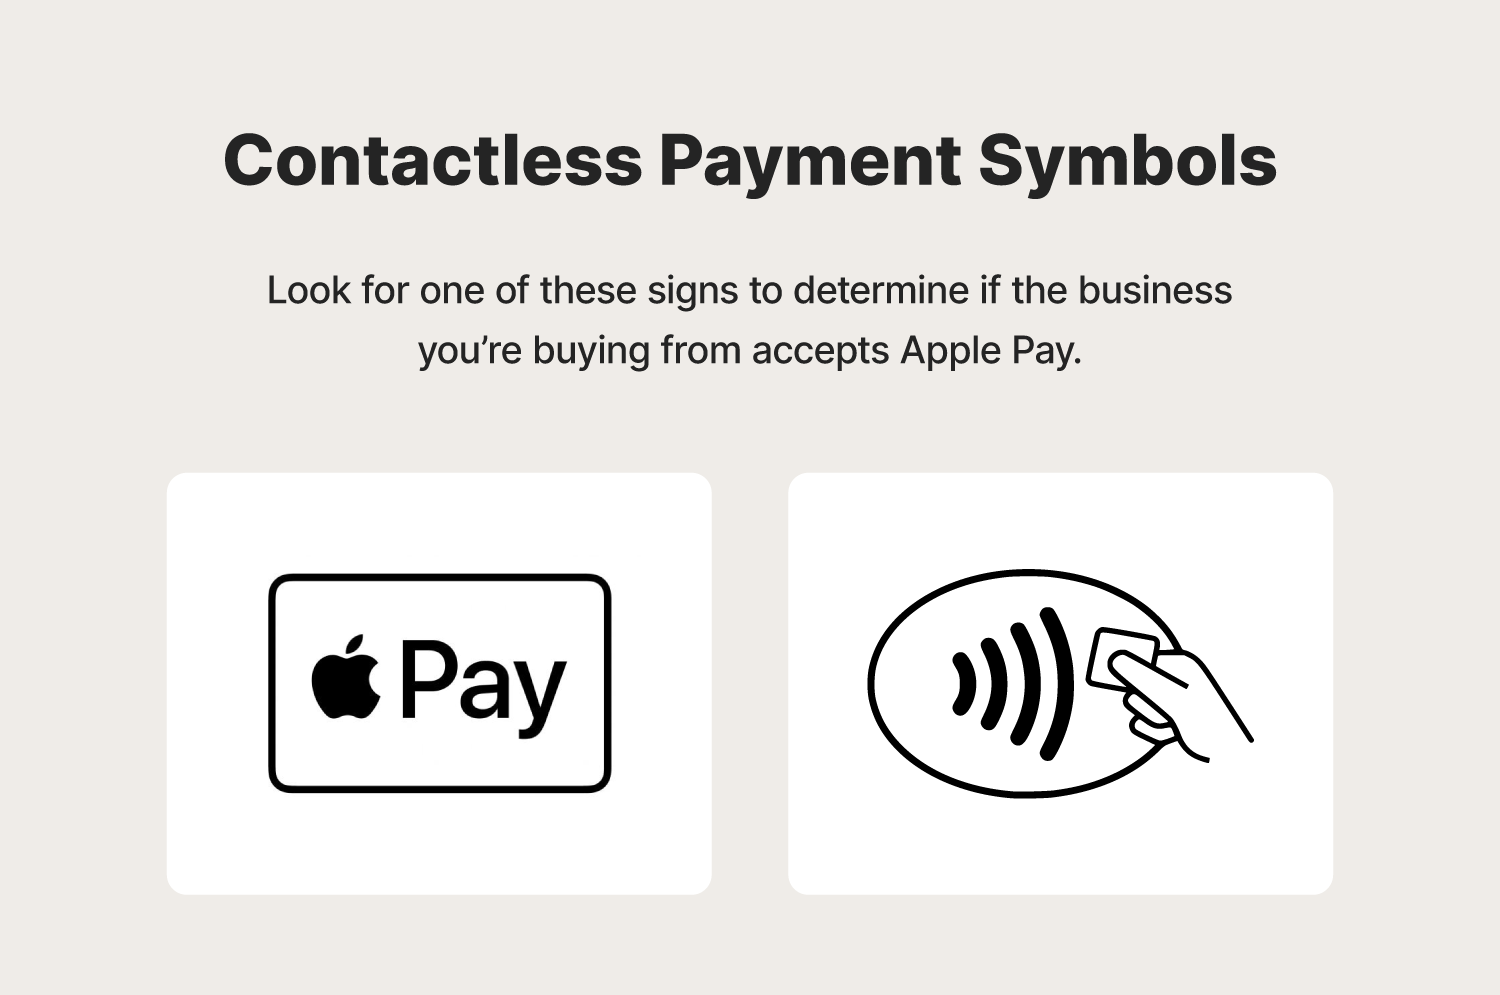 A visual representation of the different types of contactless payment and Apple Pay symbols you might find at stores, gas stations, and restaurants.